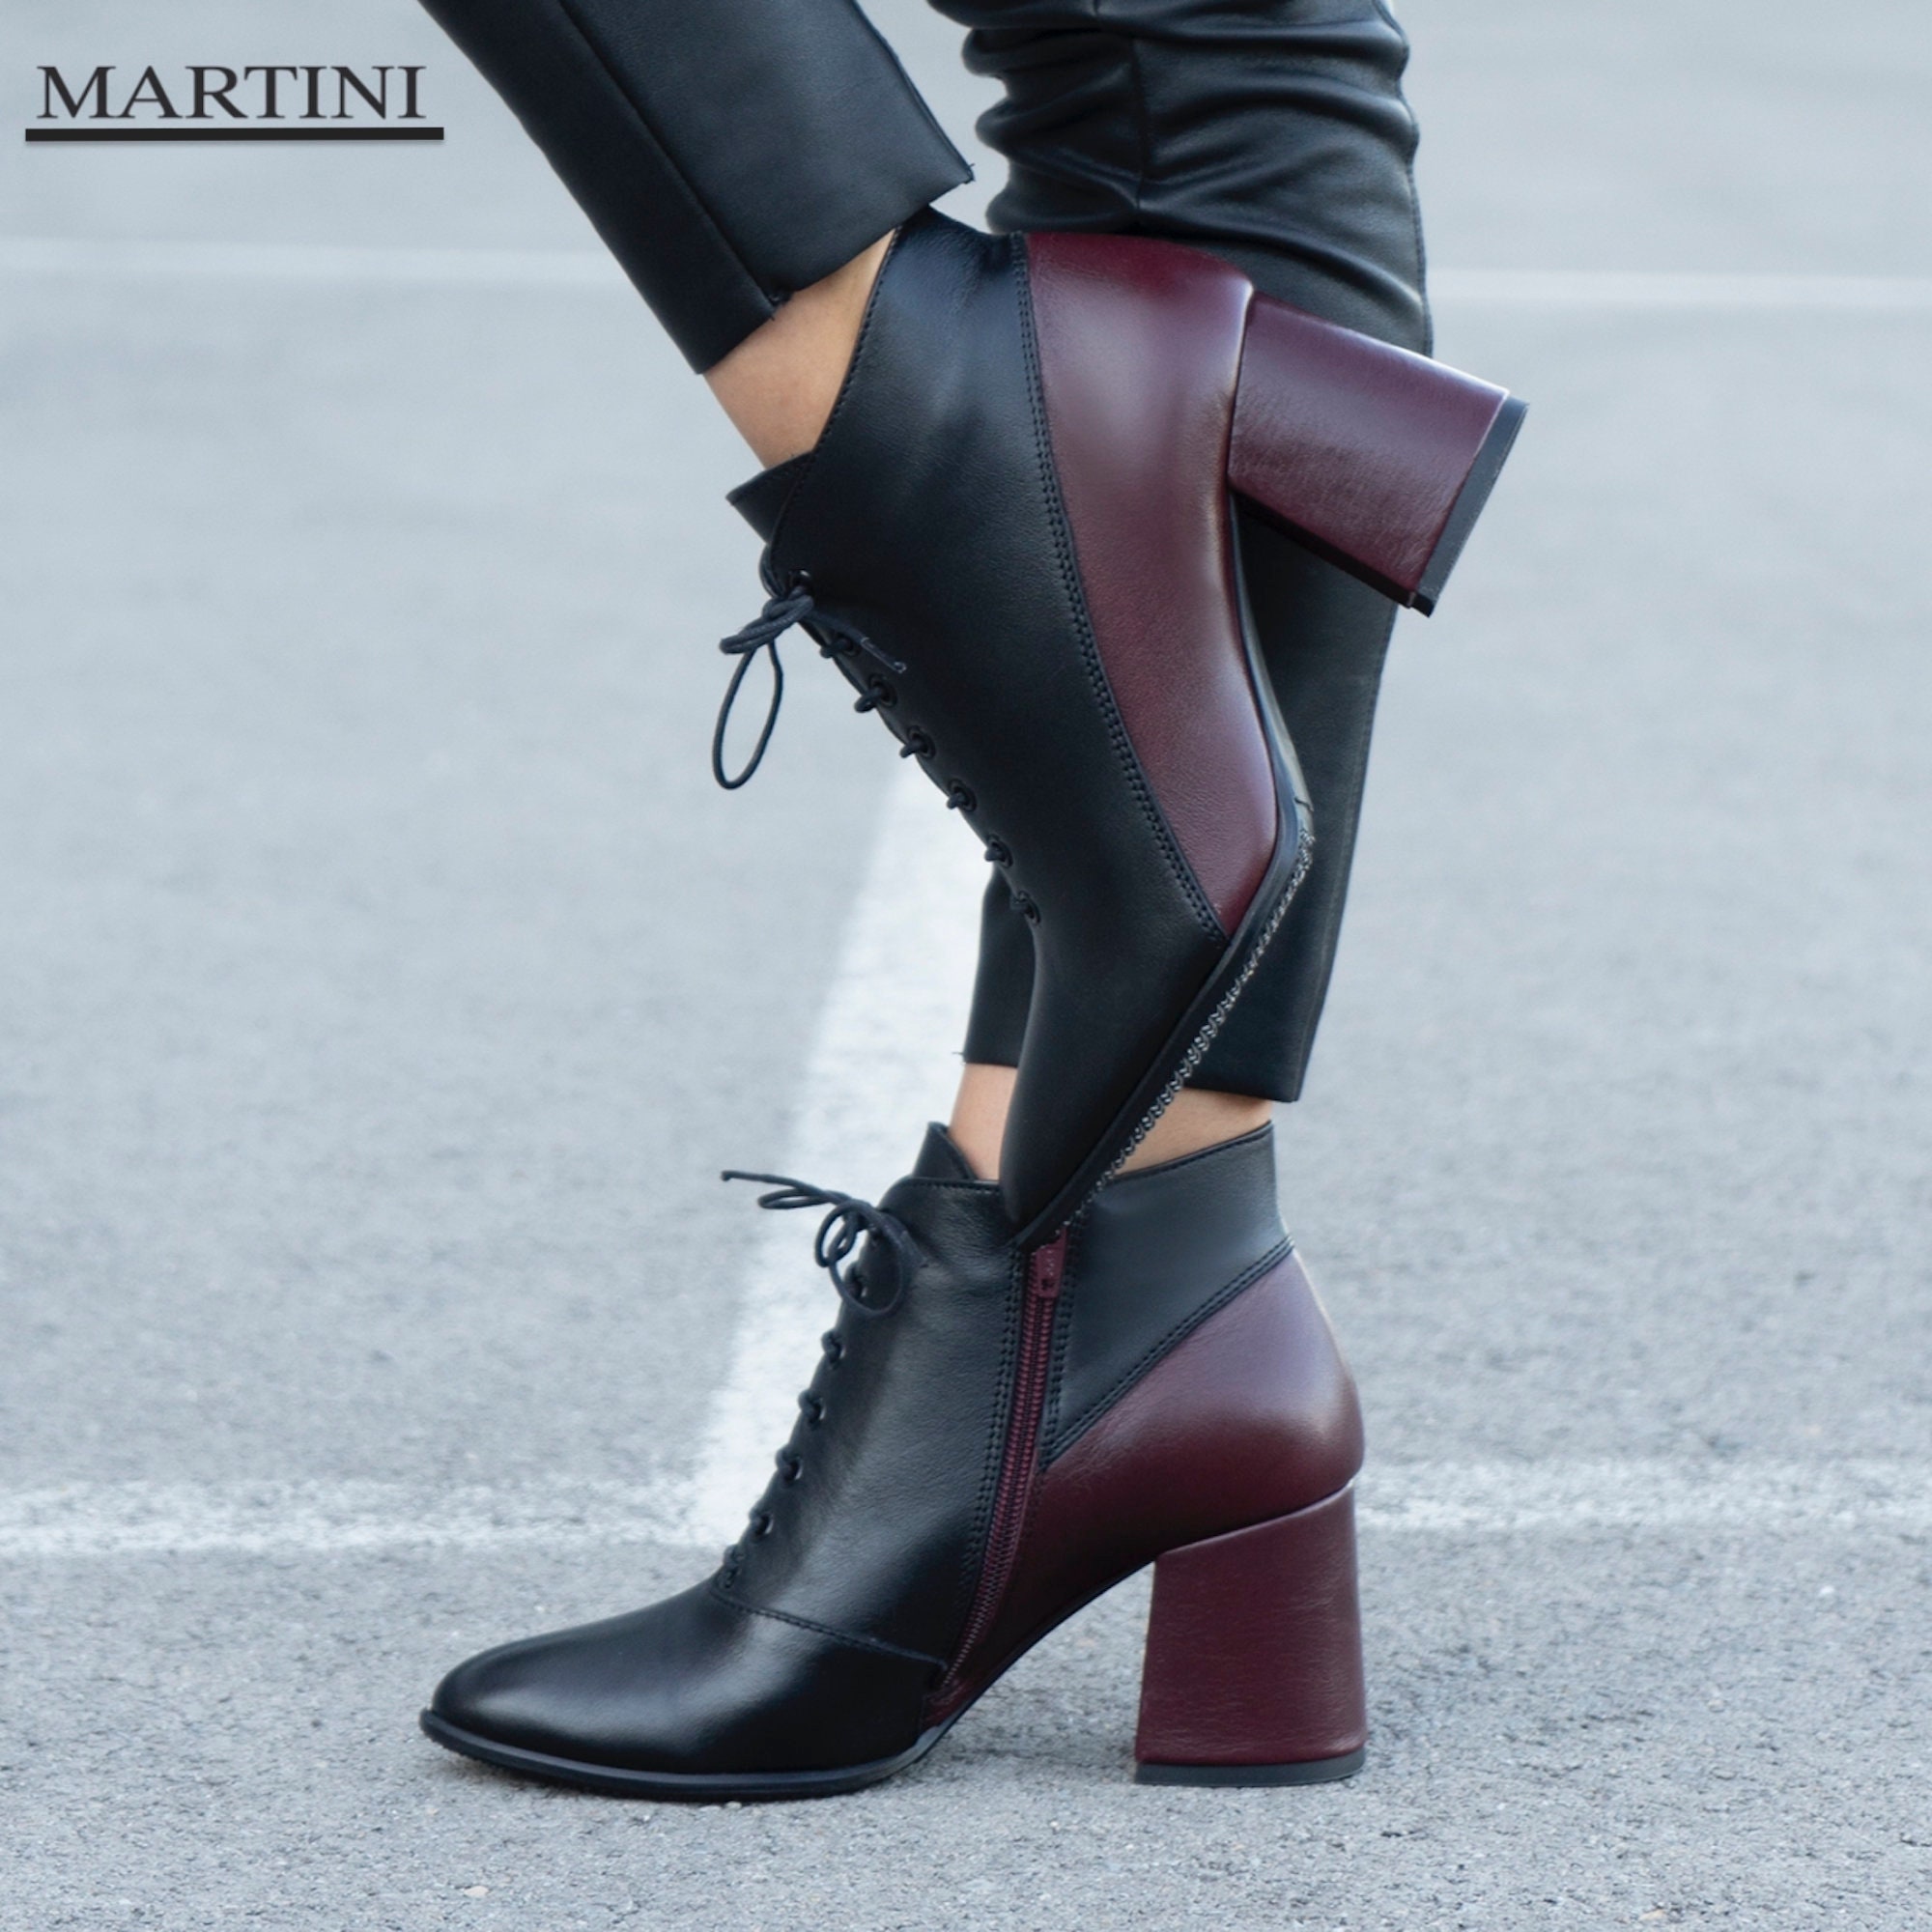 Black&red Ankle Boots For Women ~ Leather Shoes Chunky Heels Bordeaux Zipper Elegant Lace-Up